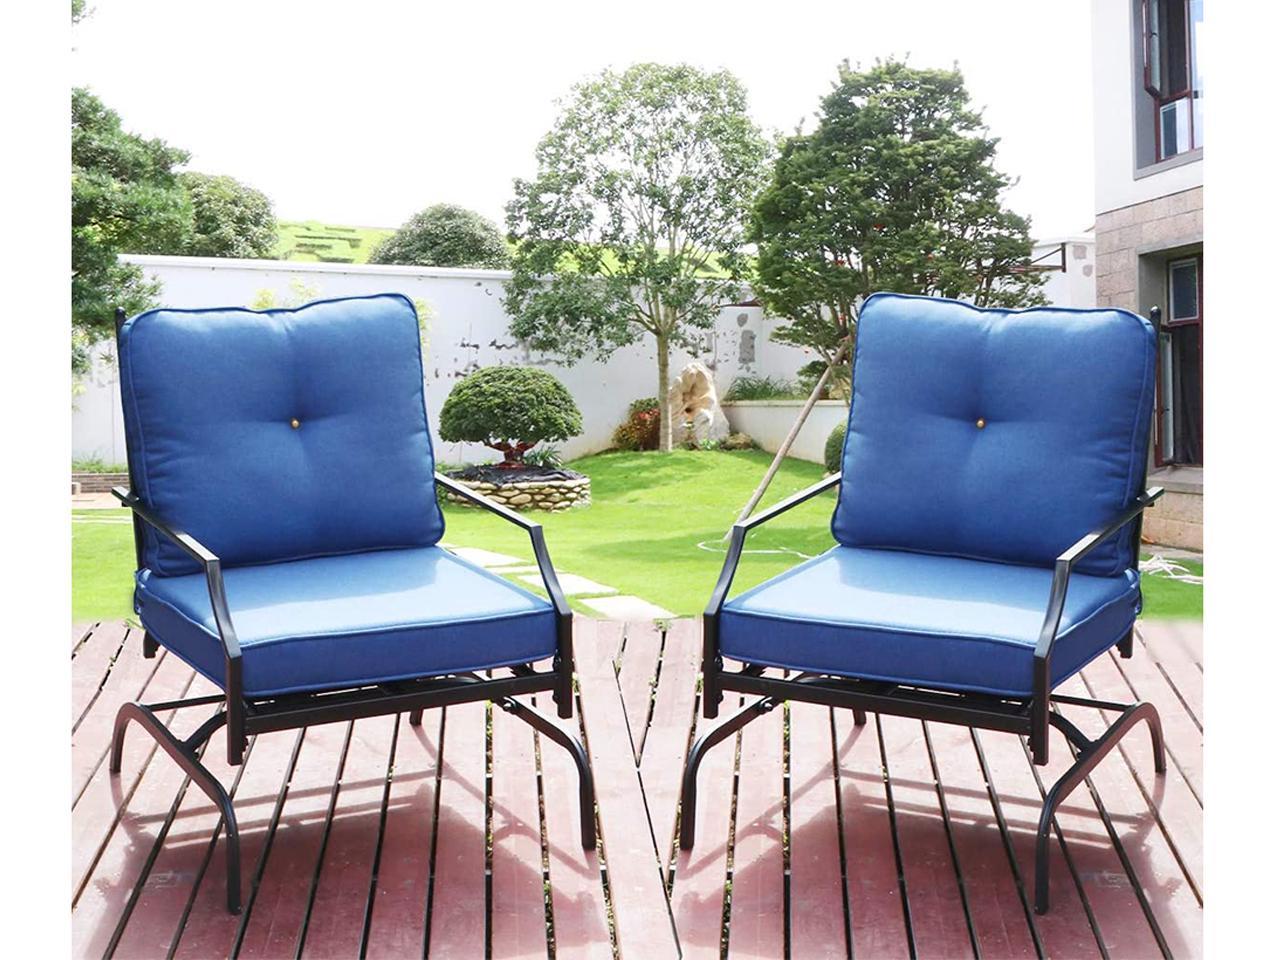 2 Piece Patio Chairs Outdoor Rocking Chair, 400 Lbs